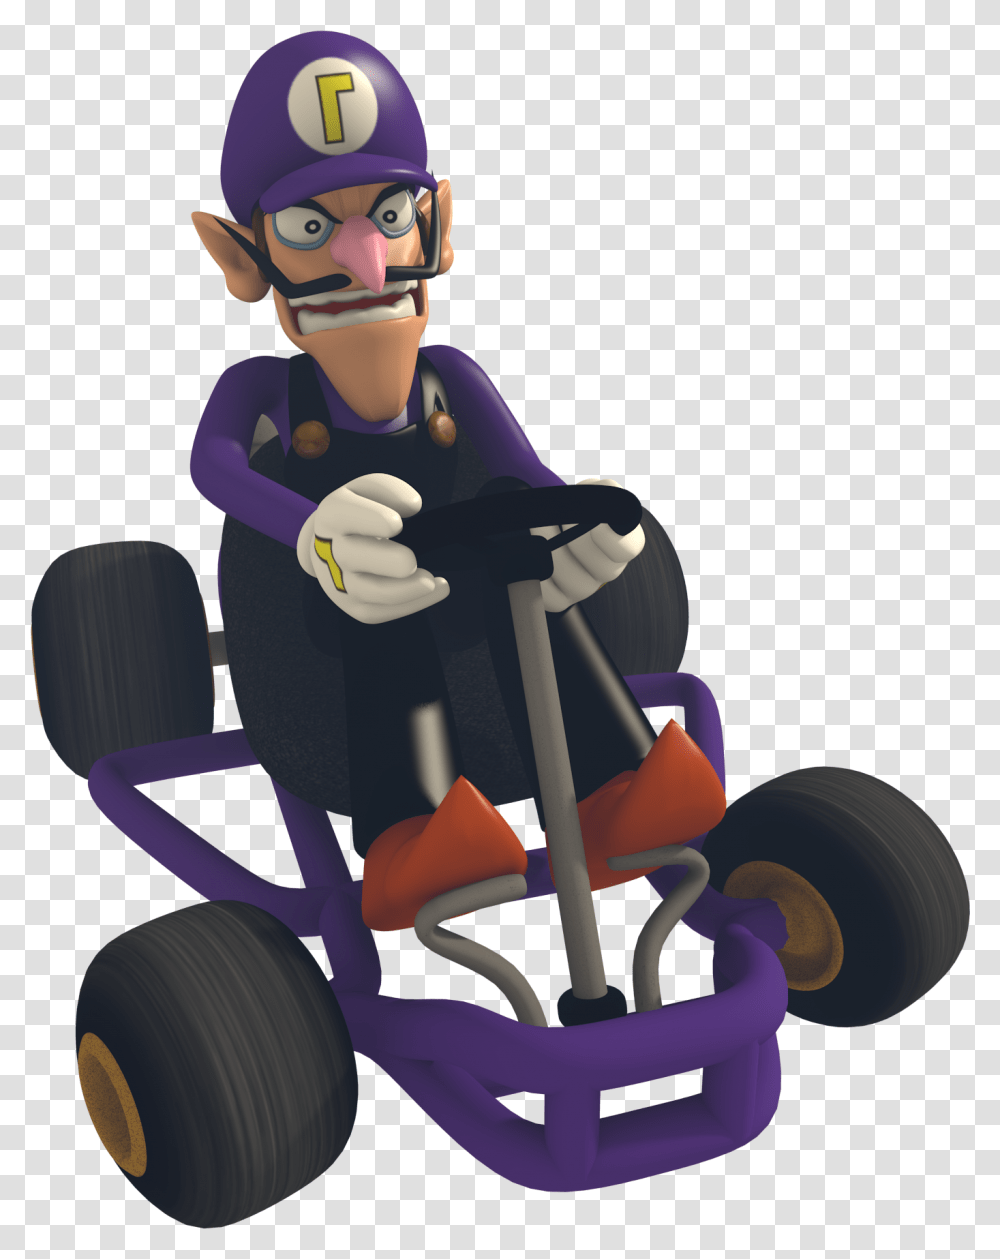 Waluigi From Mario Kart, Toy, Vehicle, Transportation, Person Transparent Png